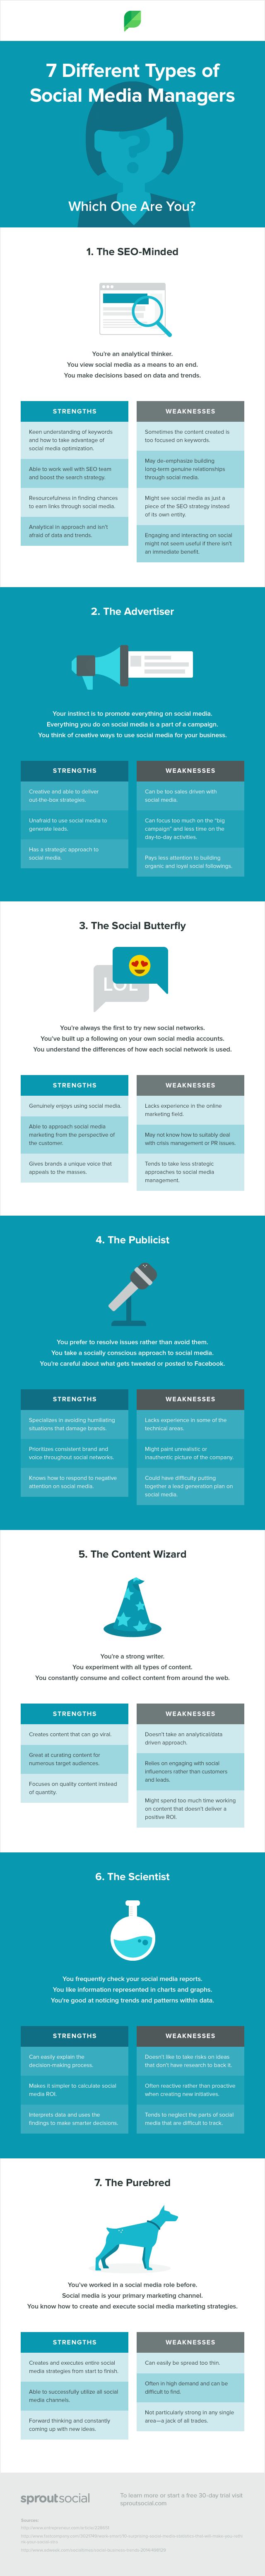 Social media infographic - 7 Different Types of Social Media Managers ...